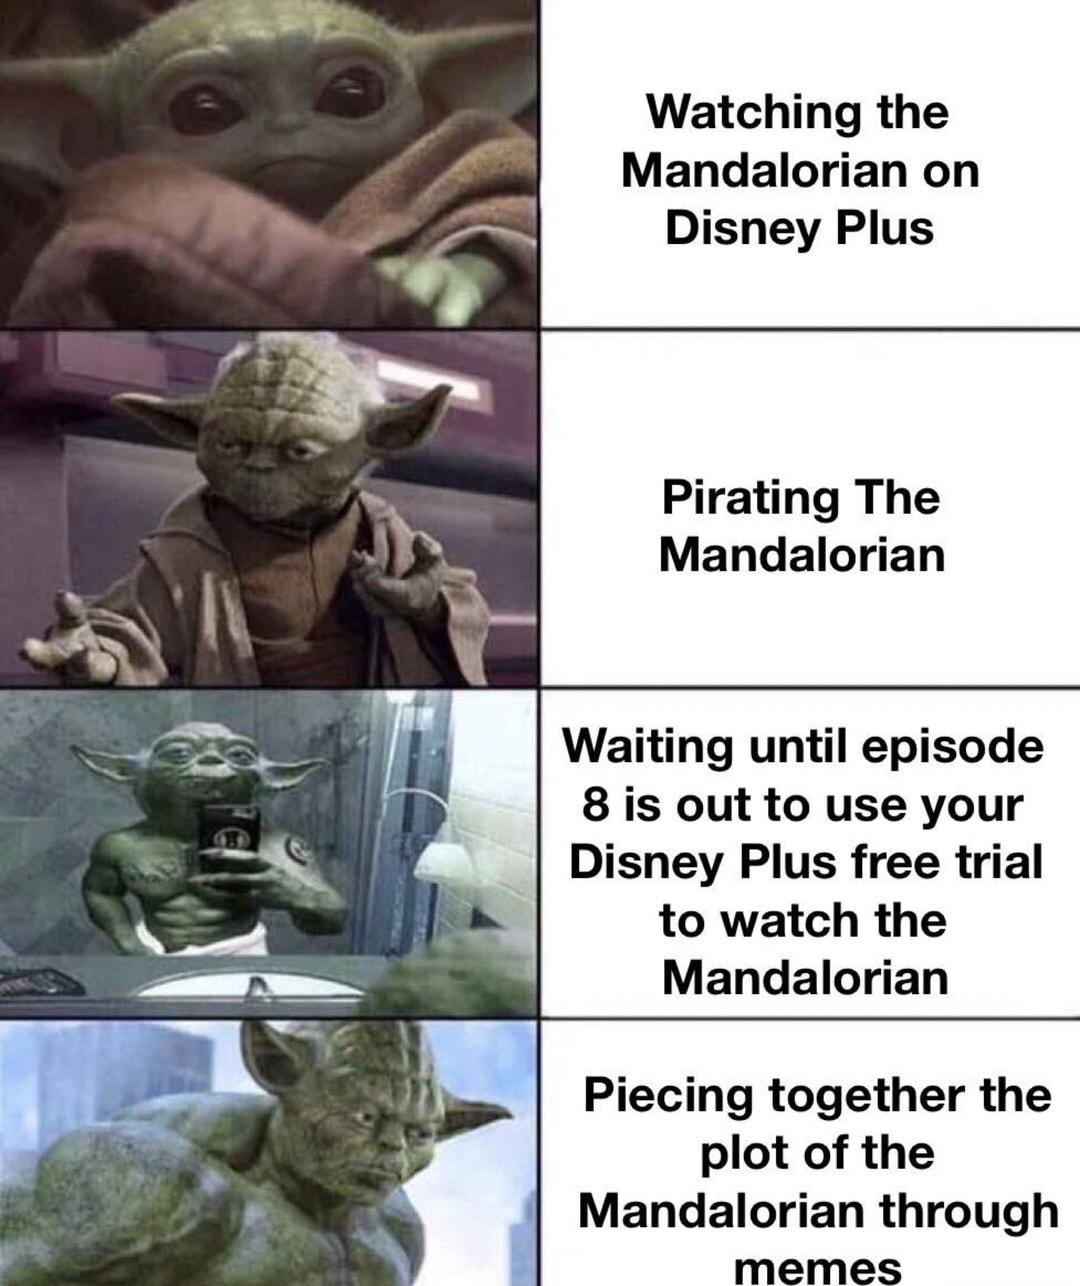 baby yoda memes - Watching the Mandalorian on Disney Plus Pirating The Mandalorian Waiting until episode 8 is out to use your Disney Plus free trial to watch the Mandalorian Piecing together the plot of the Mandalorian through memes